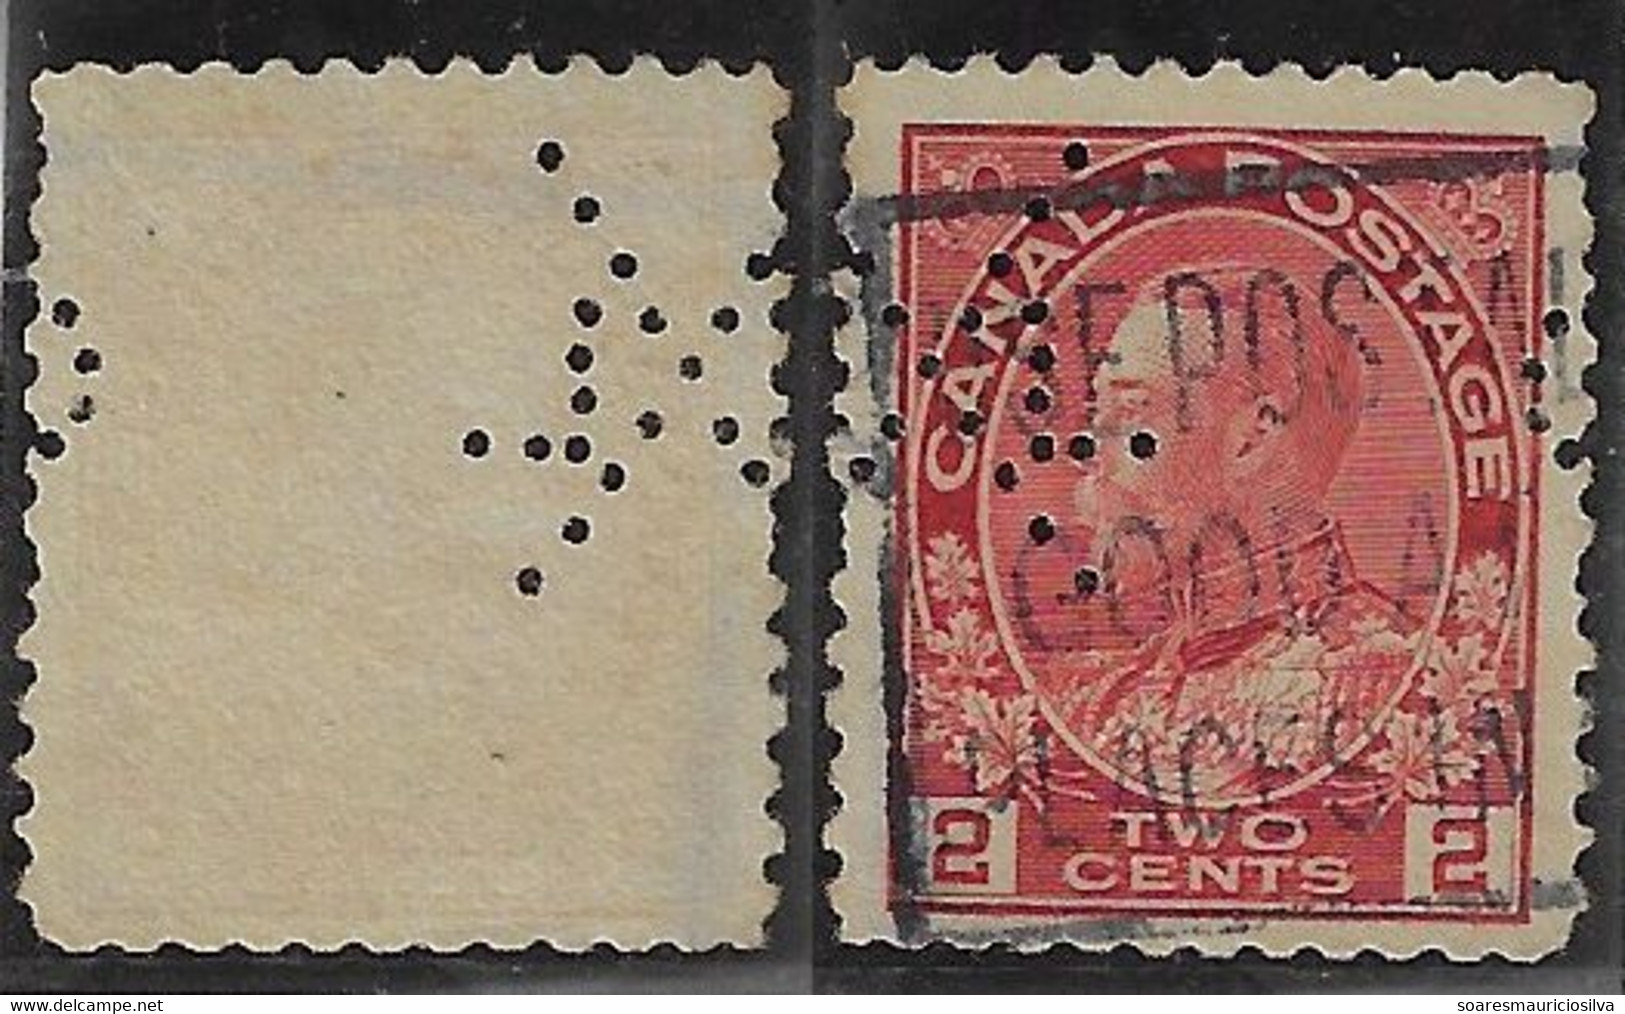 Canada 1917 / 1937 Stamp With Perfin CXL By Canadian Explosives Company From Montreal Lochung Perfore - Perfin